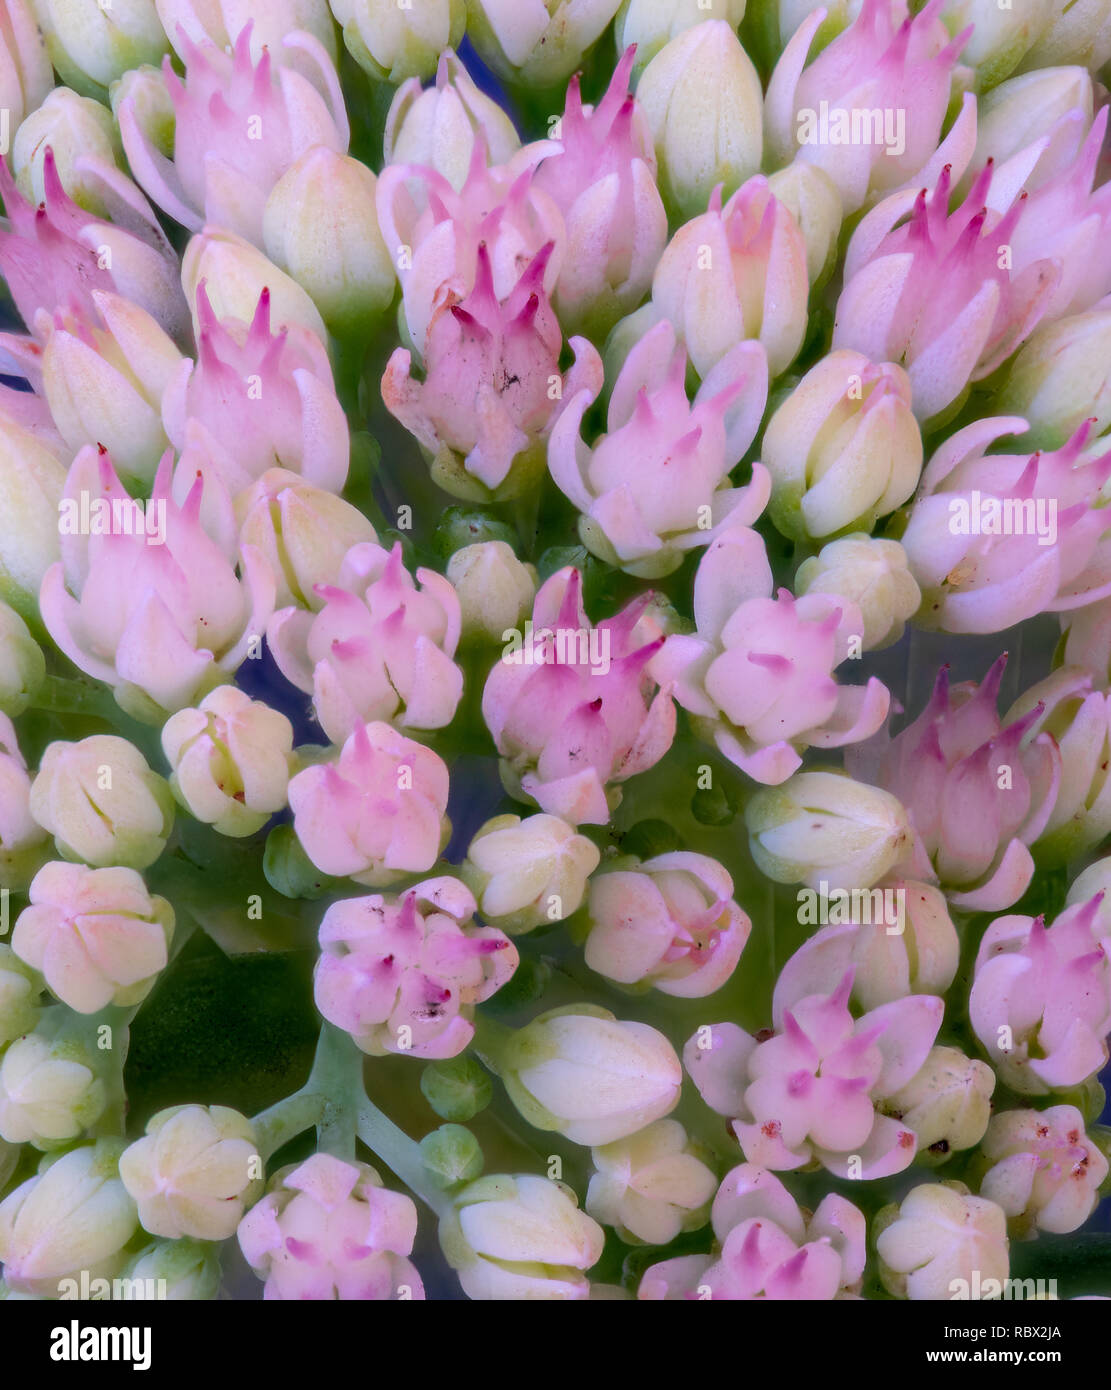 Fine art still life surrealistic pastel color macro of evolving buds from a stonecrop plant in painting style Stock Photo